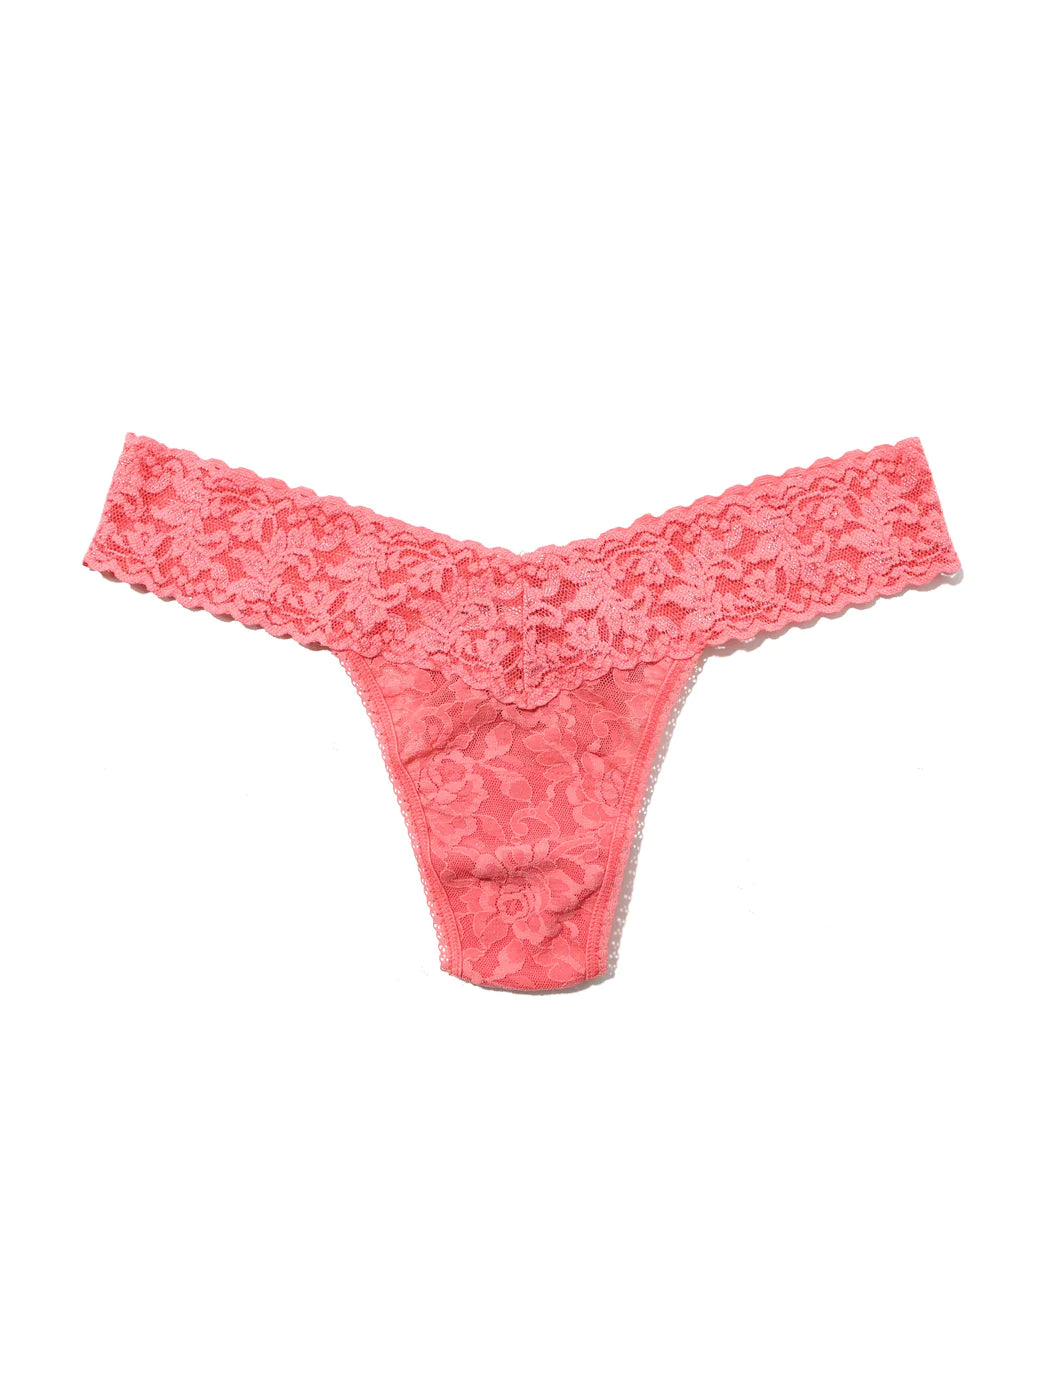 Buy guava Hanky Panky Signature Lace Low Rise Thong - Packaged 4911p